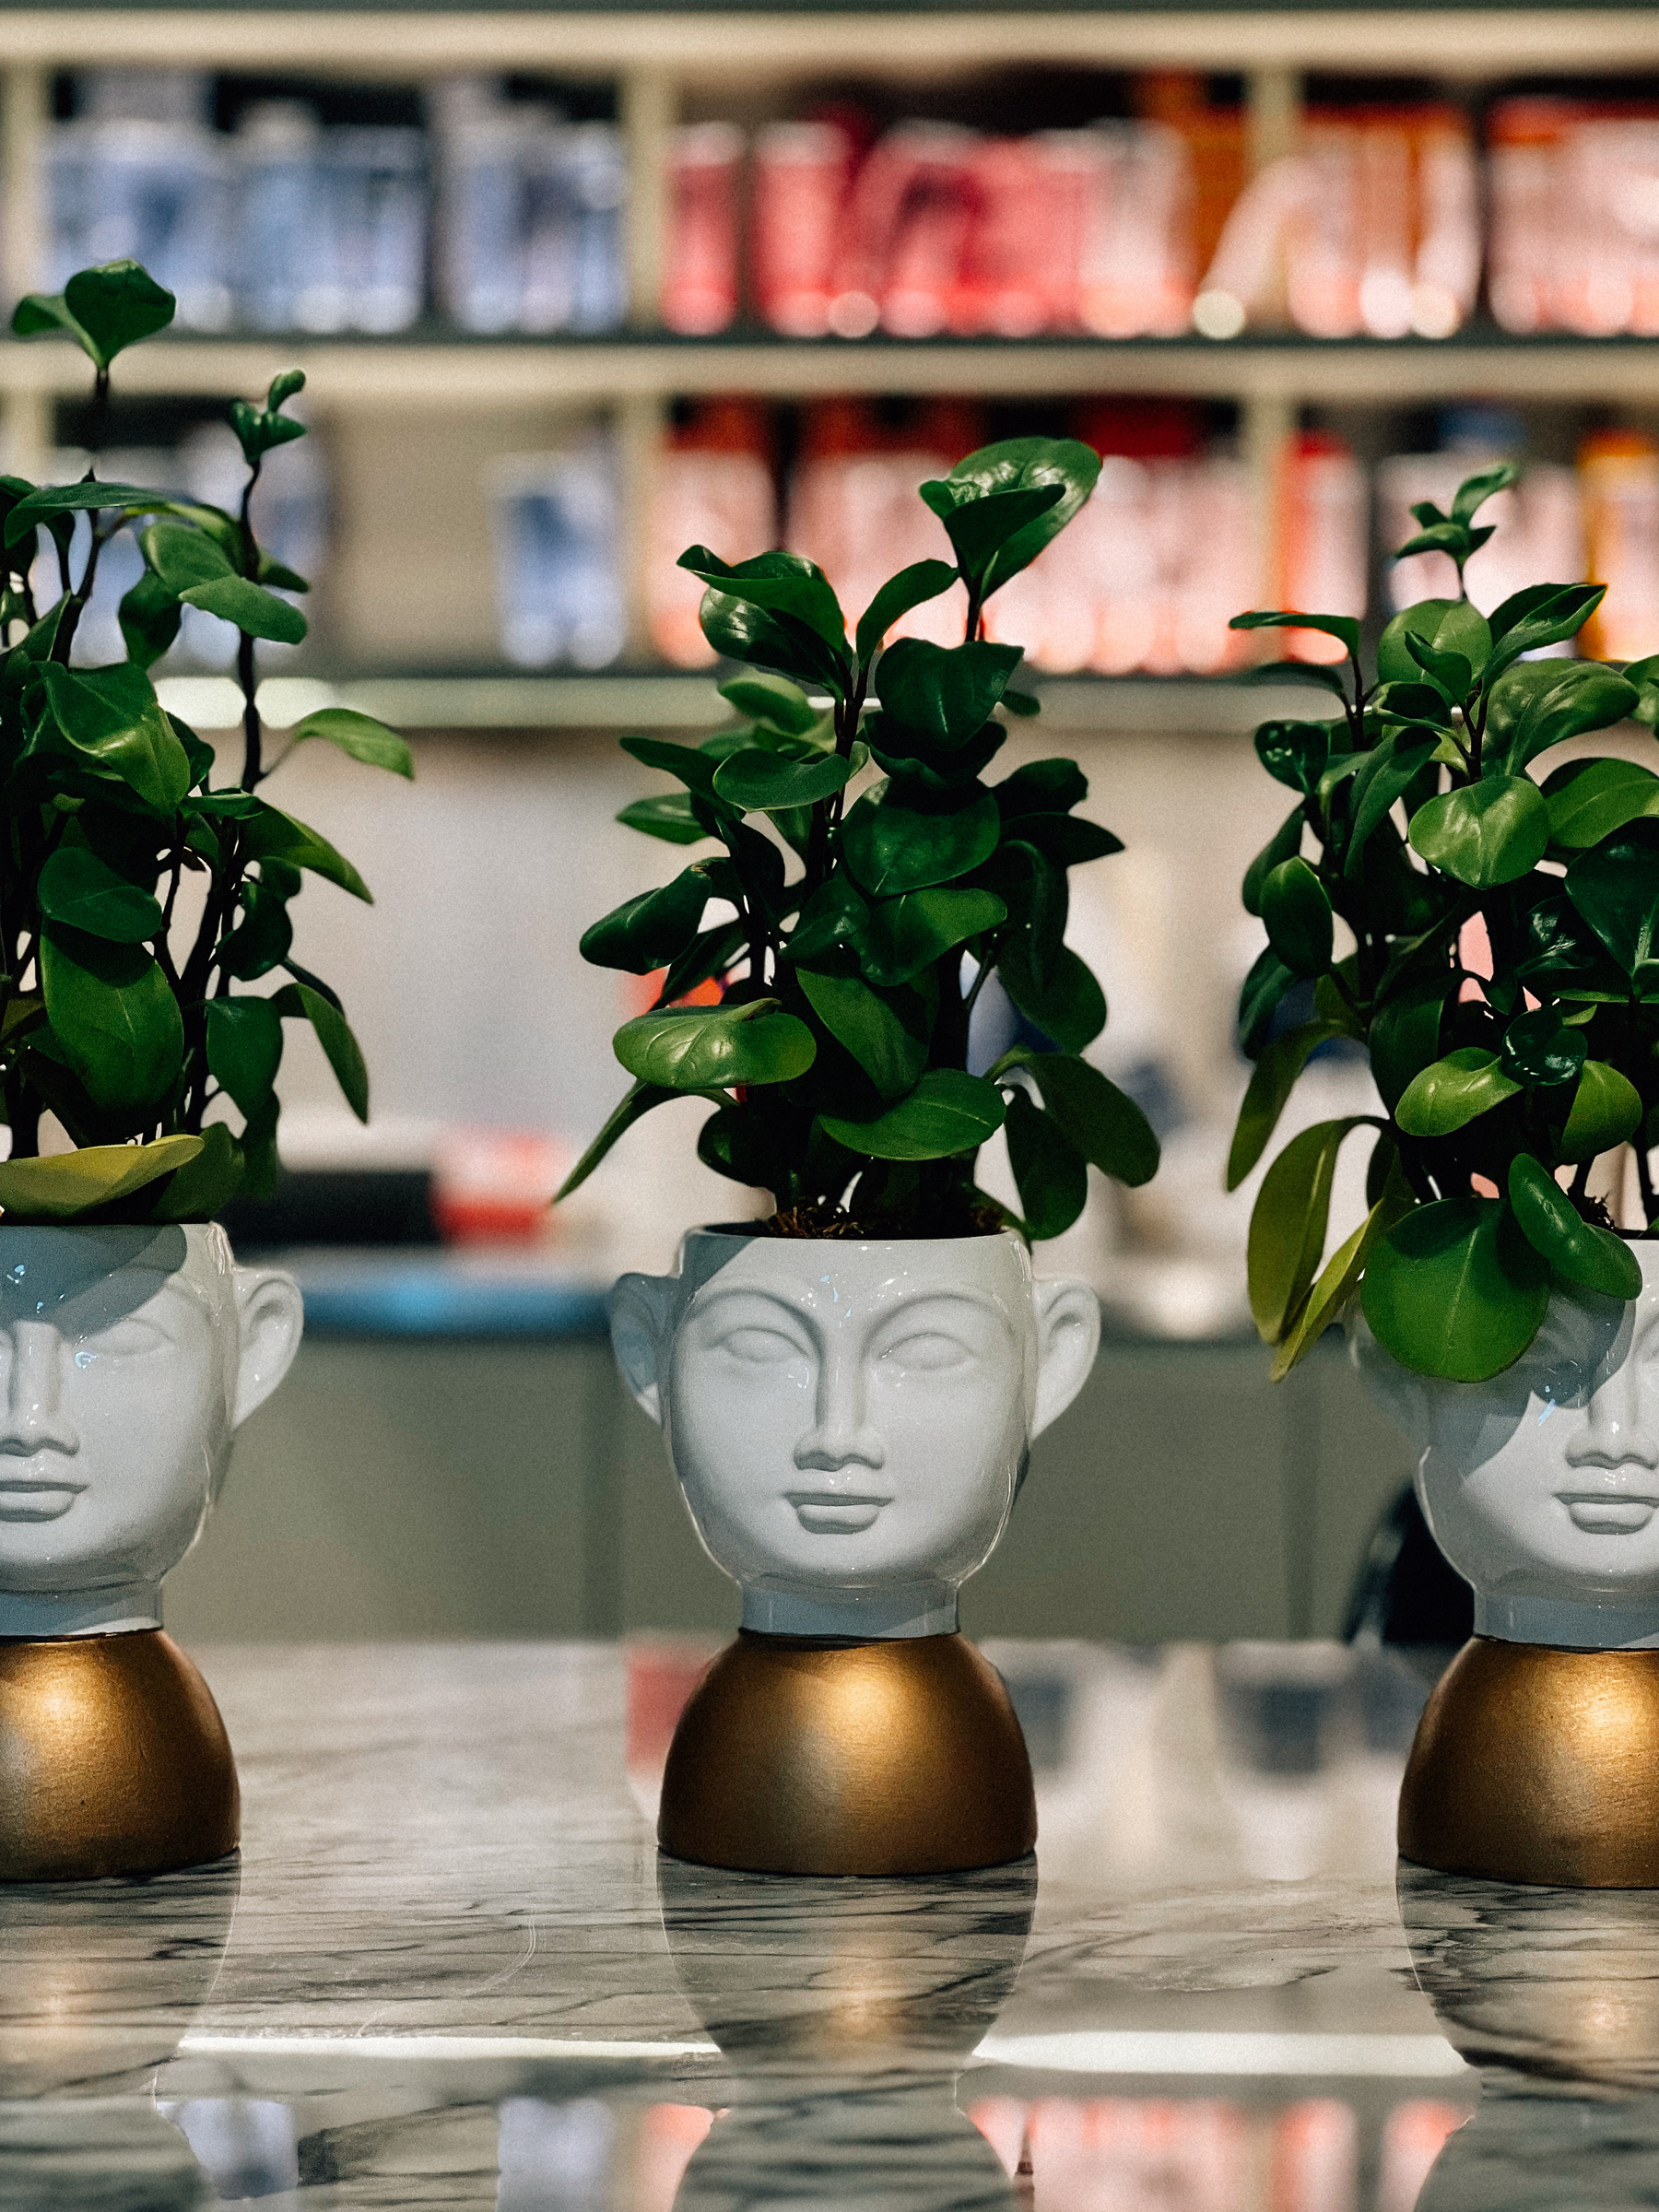 Potted green plants growing from ornamental head-shaped planters on a marbled surface, with blurred shelves of colorful products in the background.